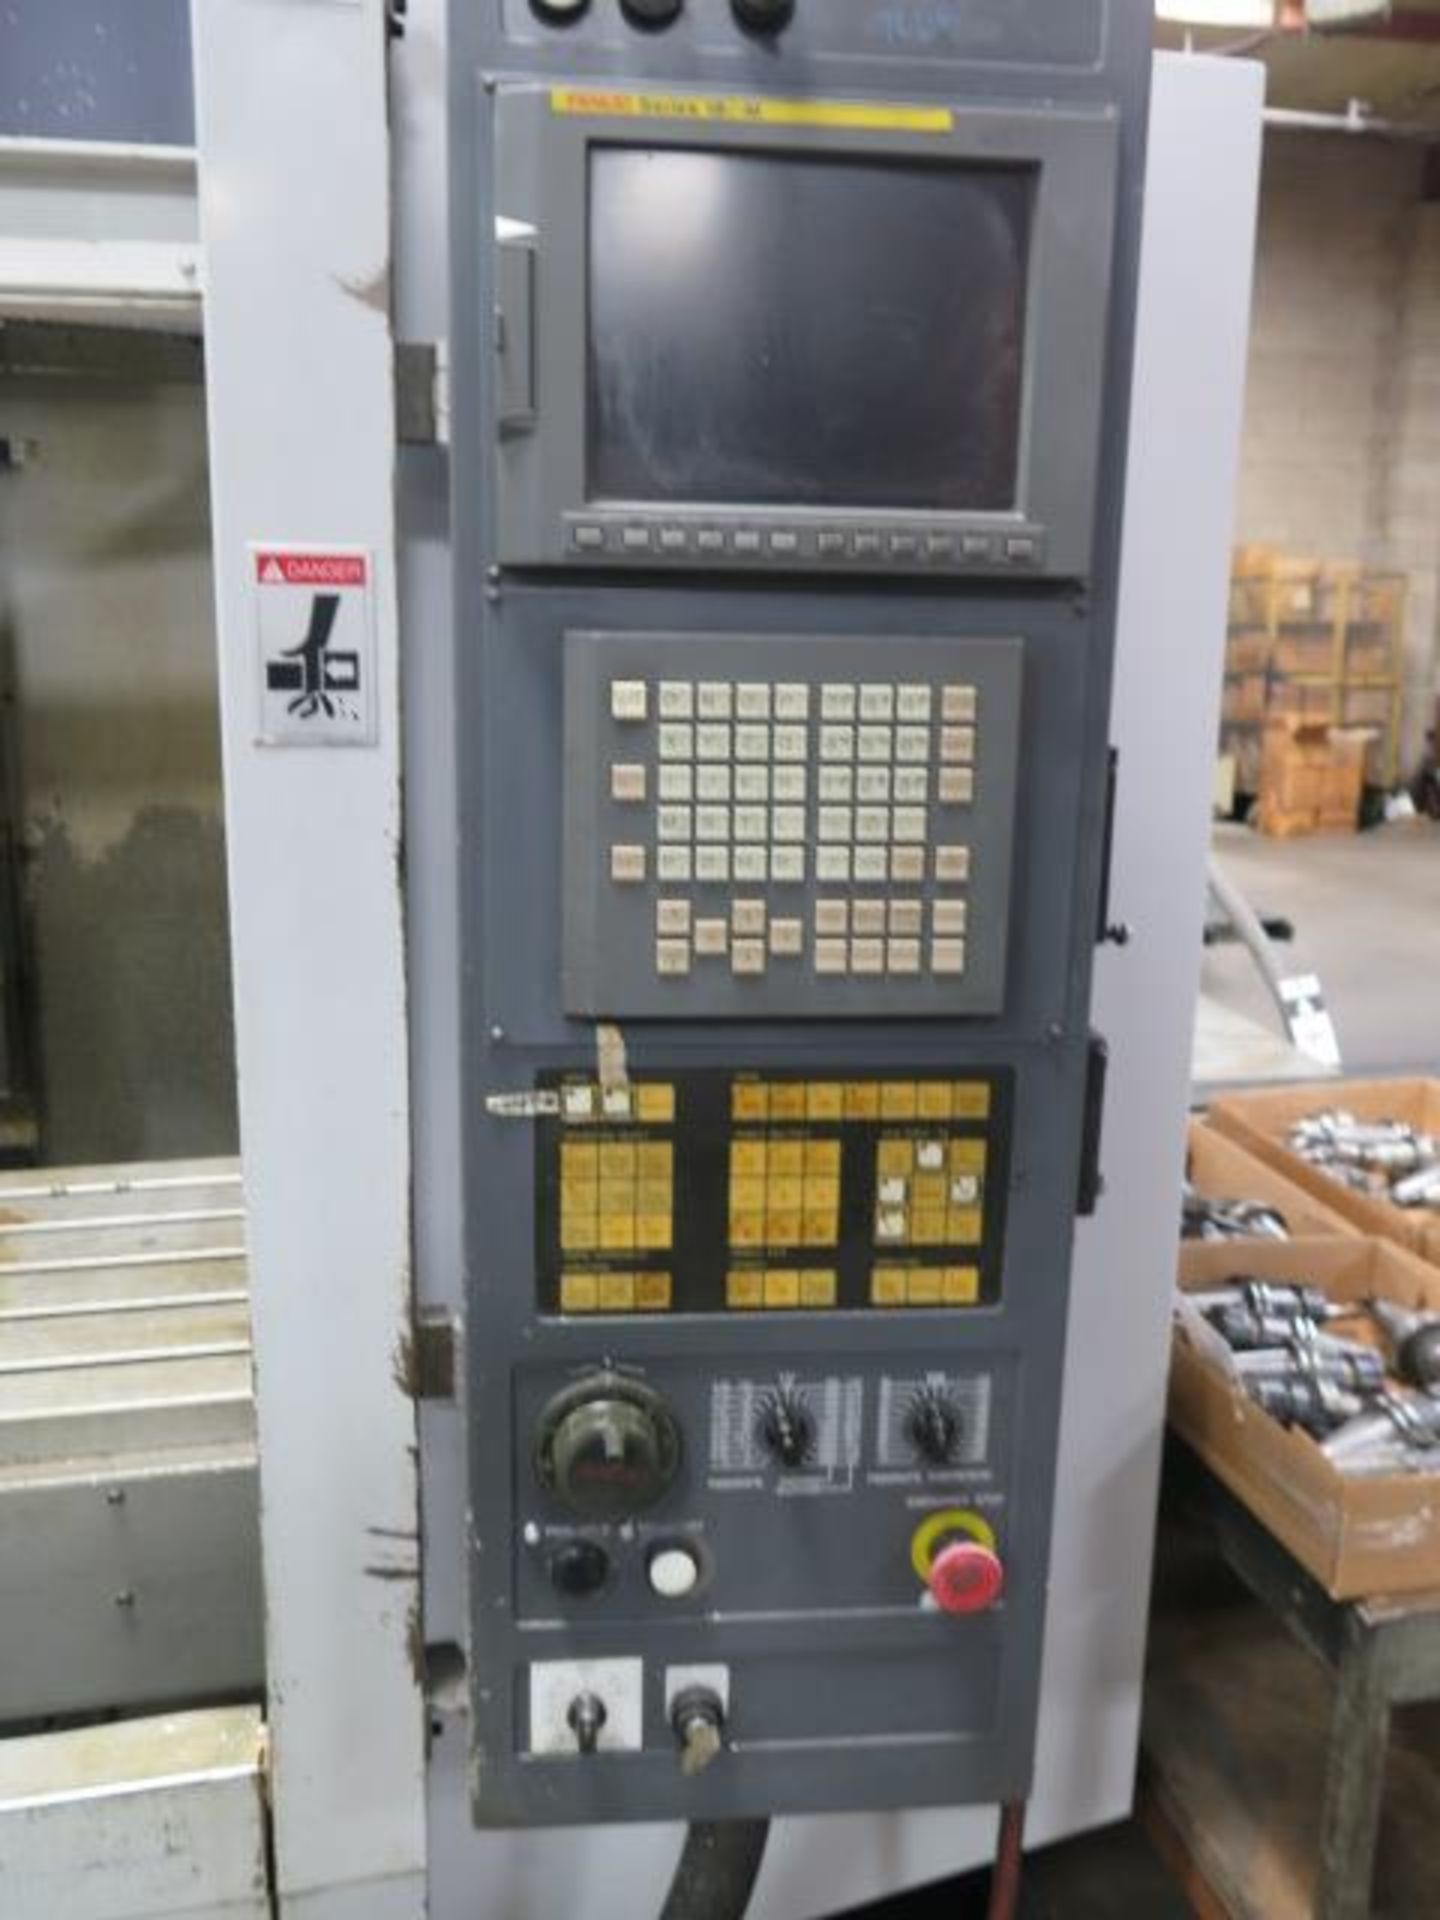 Enshu EV530S CNC VMC s/n 188 w/ Fanuc Series 18i-M Controls, 30-Station Side SOLD AS IS - Image 10 of 14